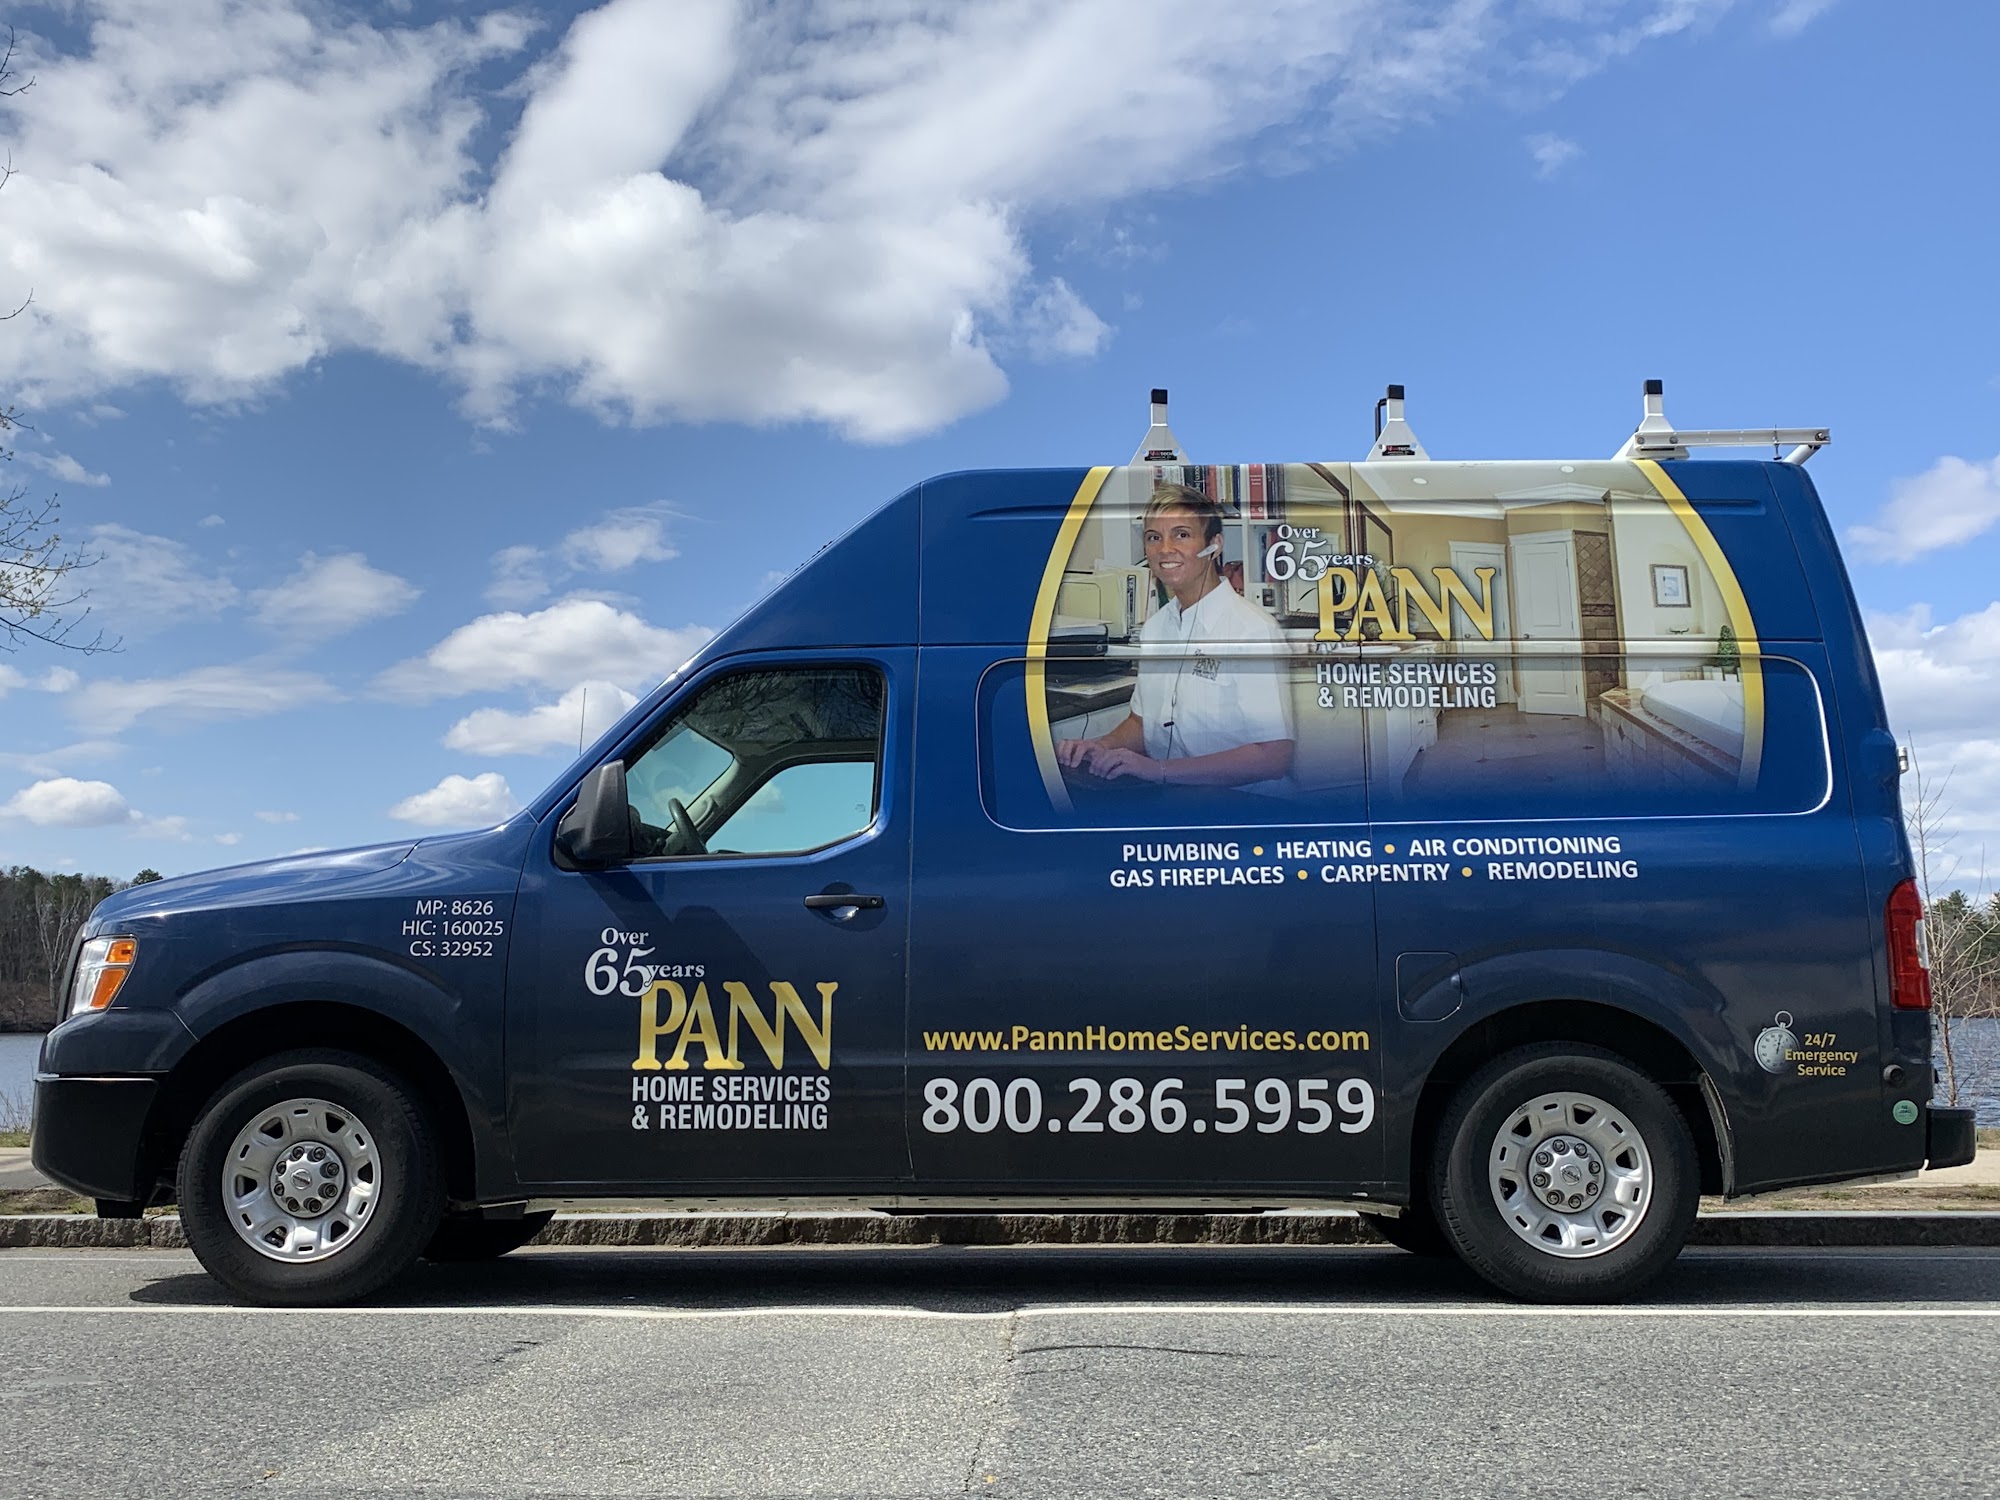 Pann Home Services & Remodeling